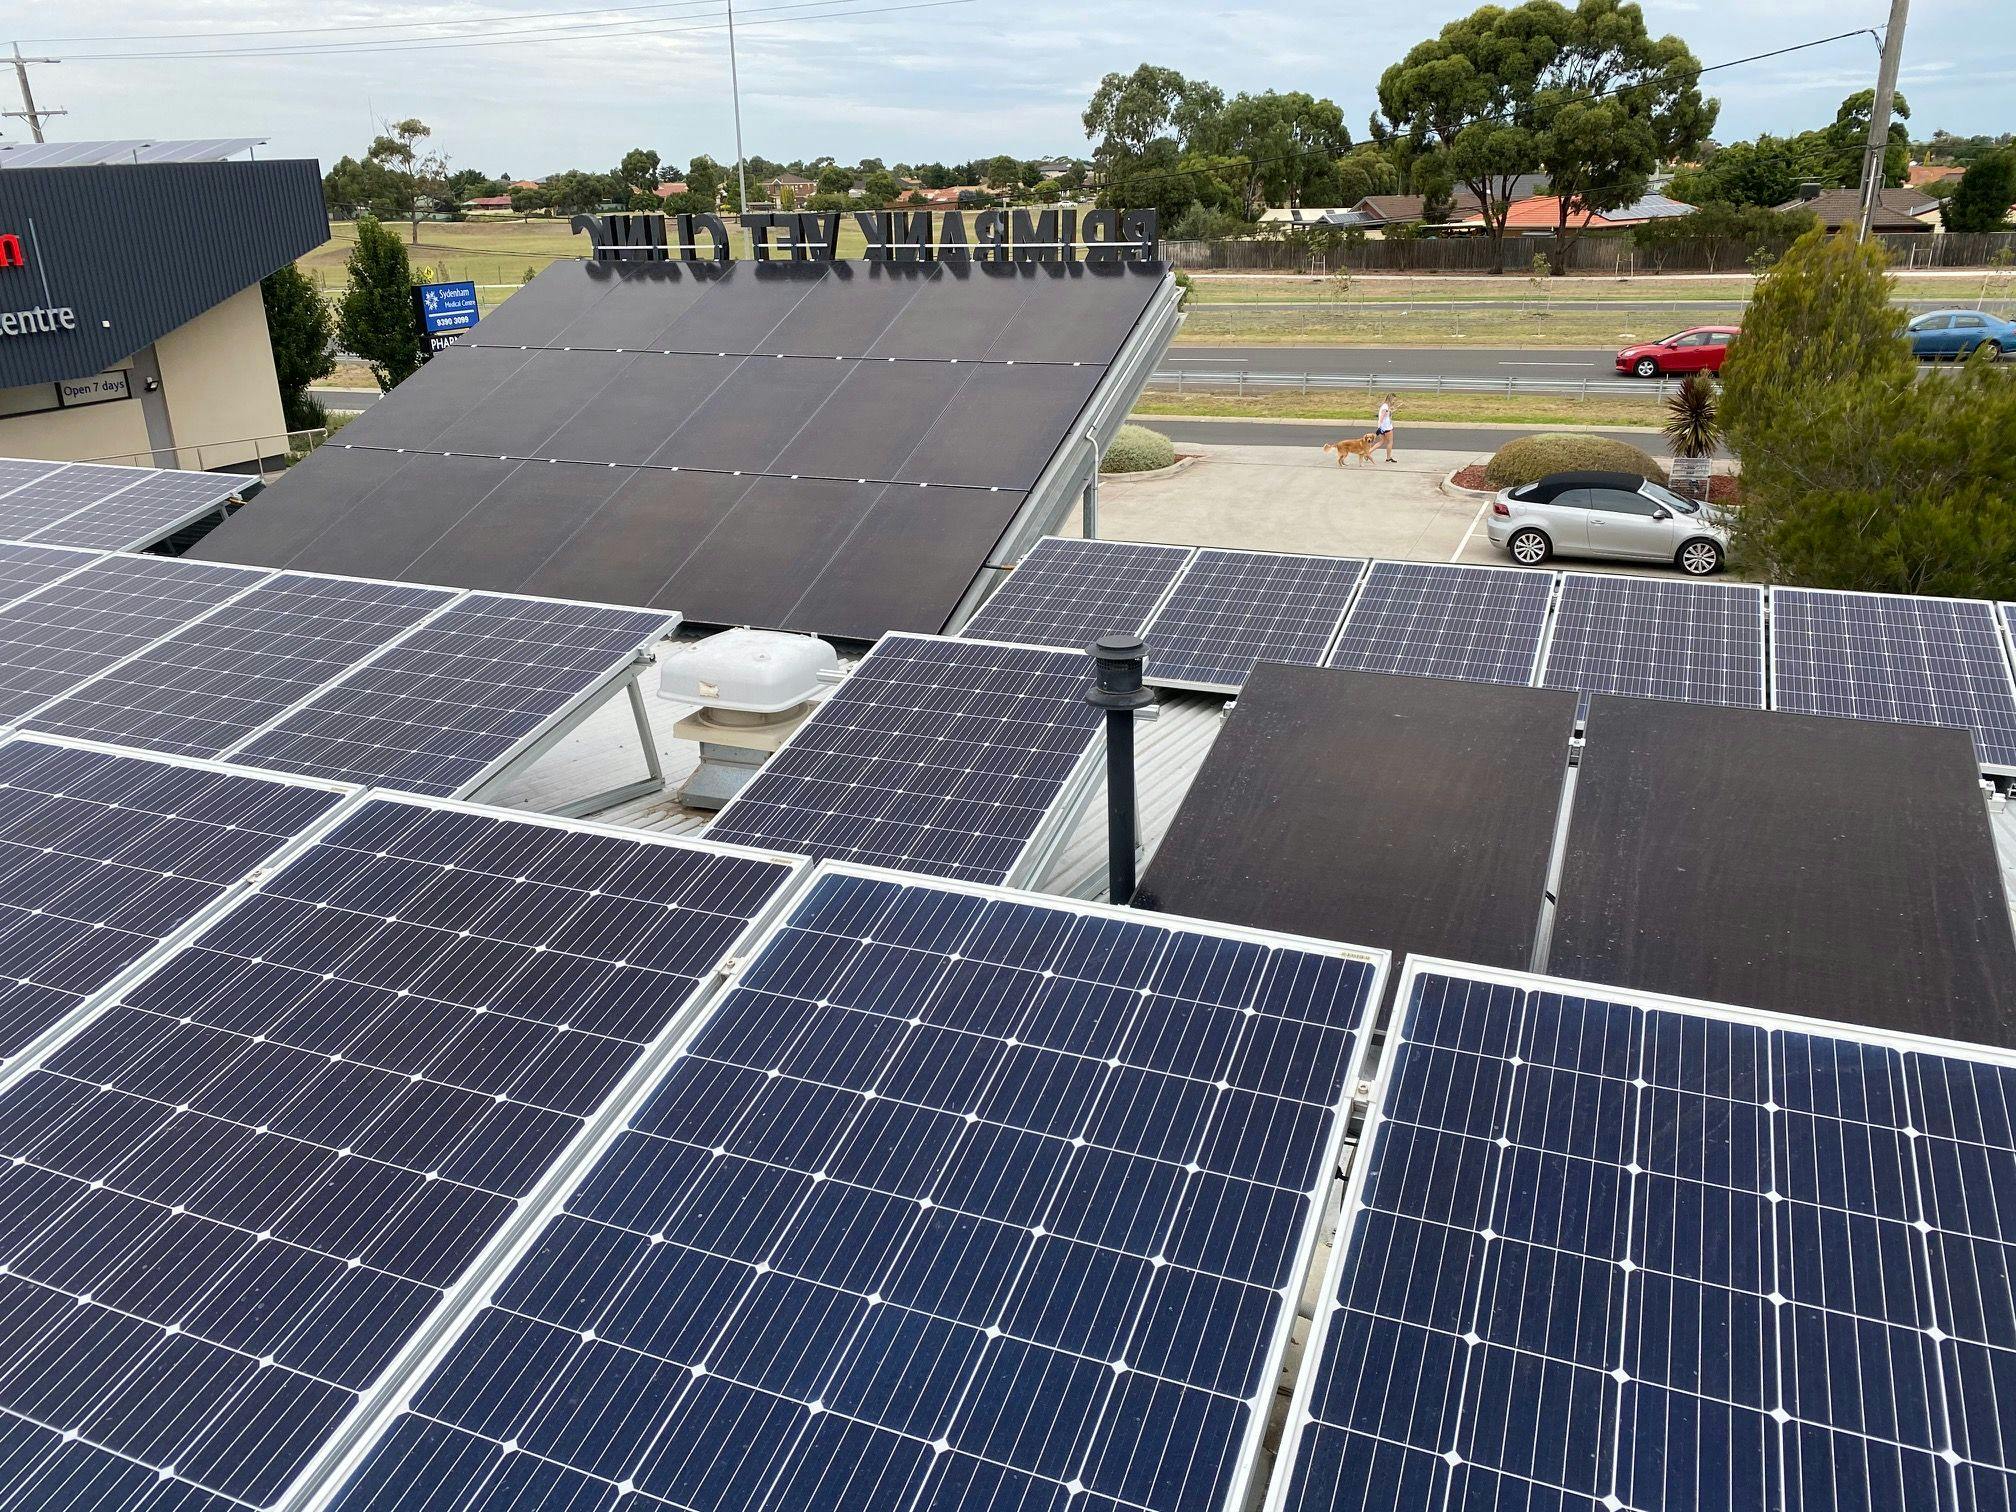 Solar panels installed on the roof of Brimbank Vet Clinic (Photo courtesy of Vets for Climate Action).